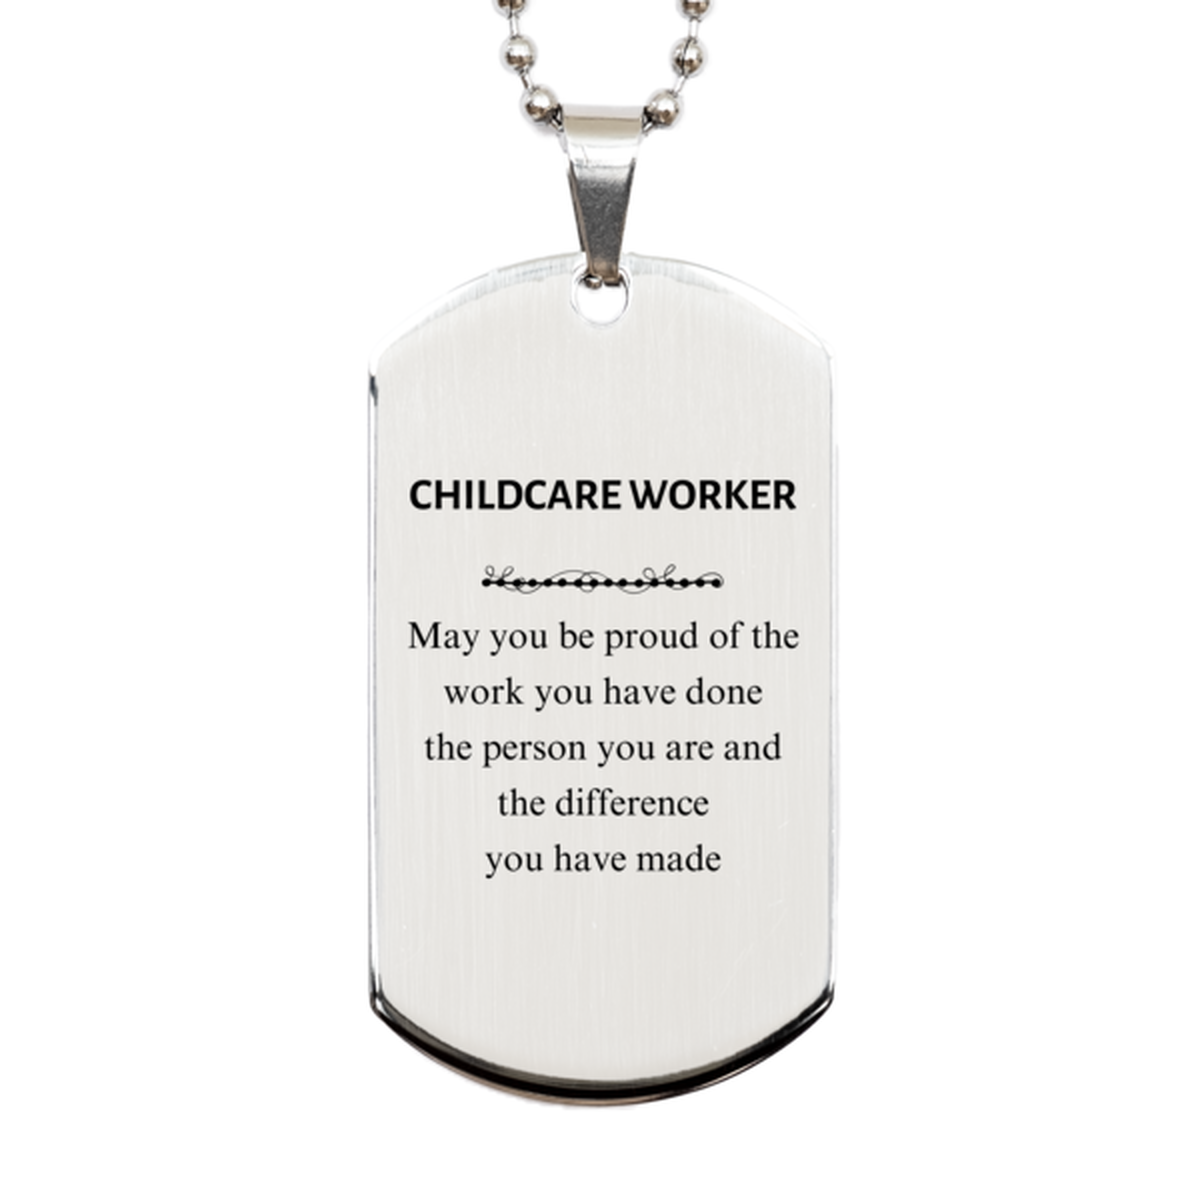 Childcare Worker May you be proud of the work you have done, Retirement Childcare Worker Silver Dog Tag for Colleague Appreciation Gifts Amazing for Childcare Worker